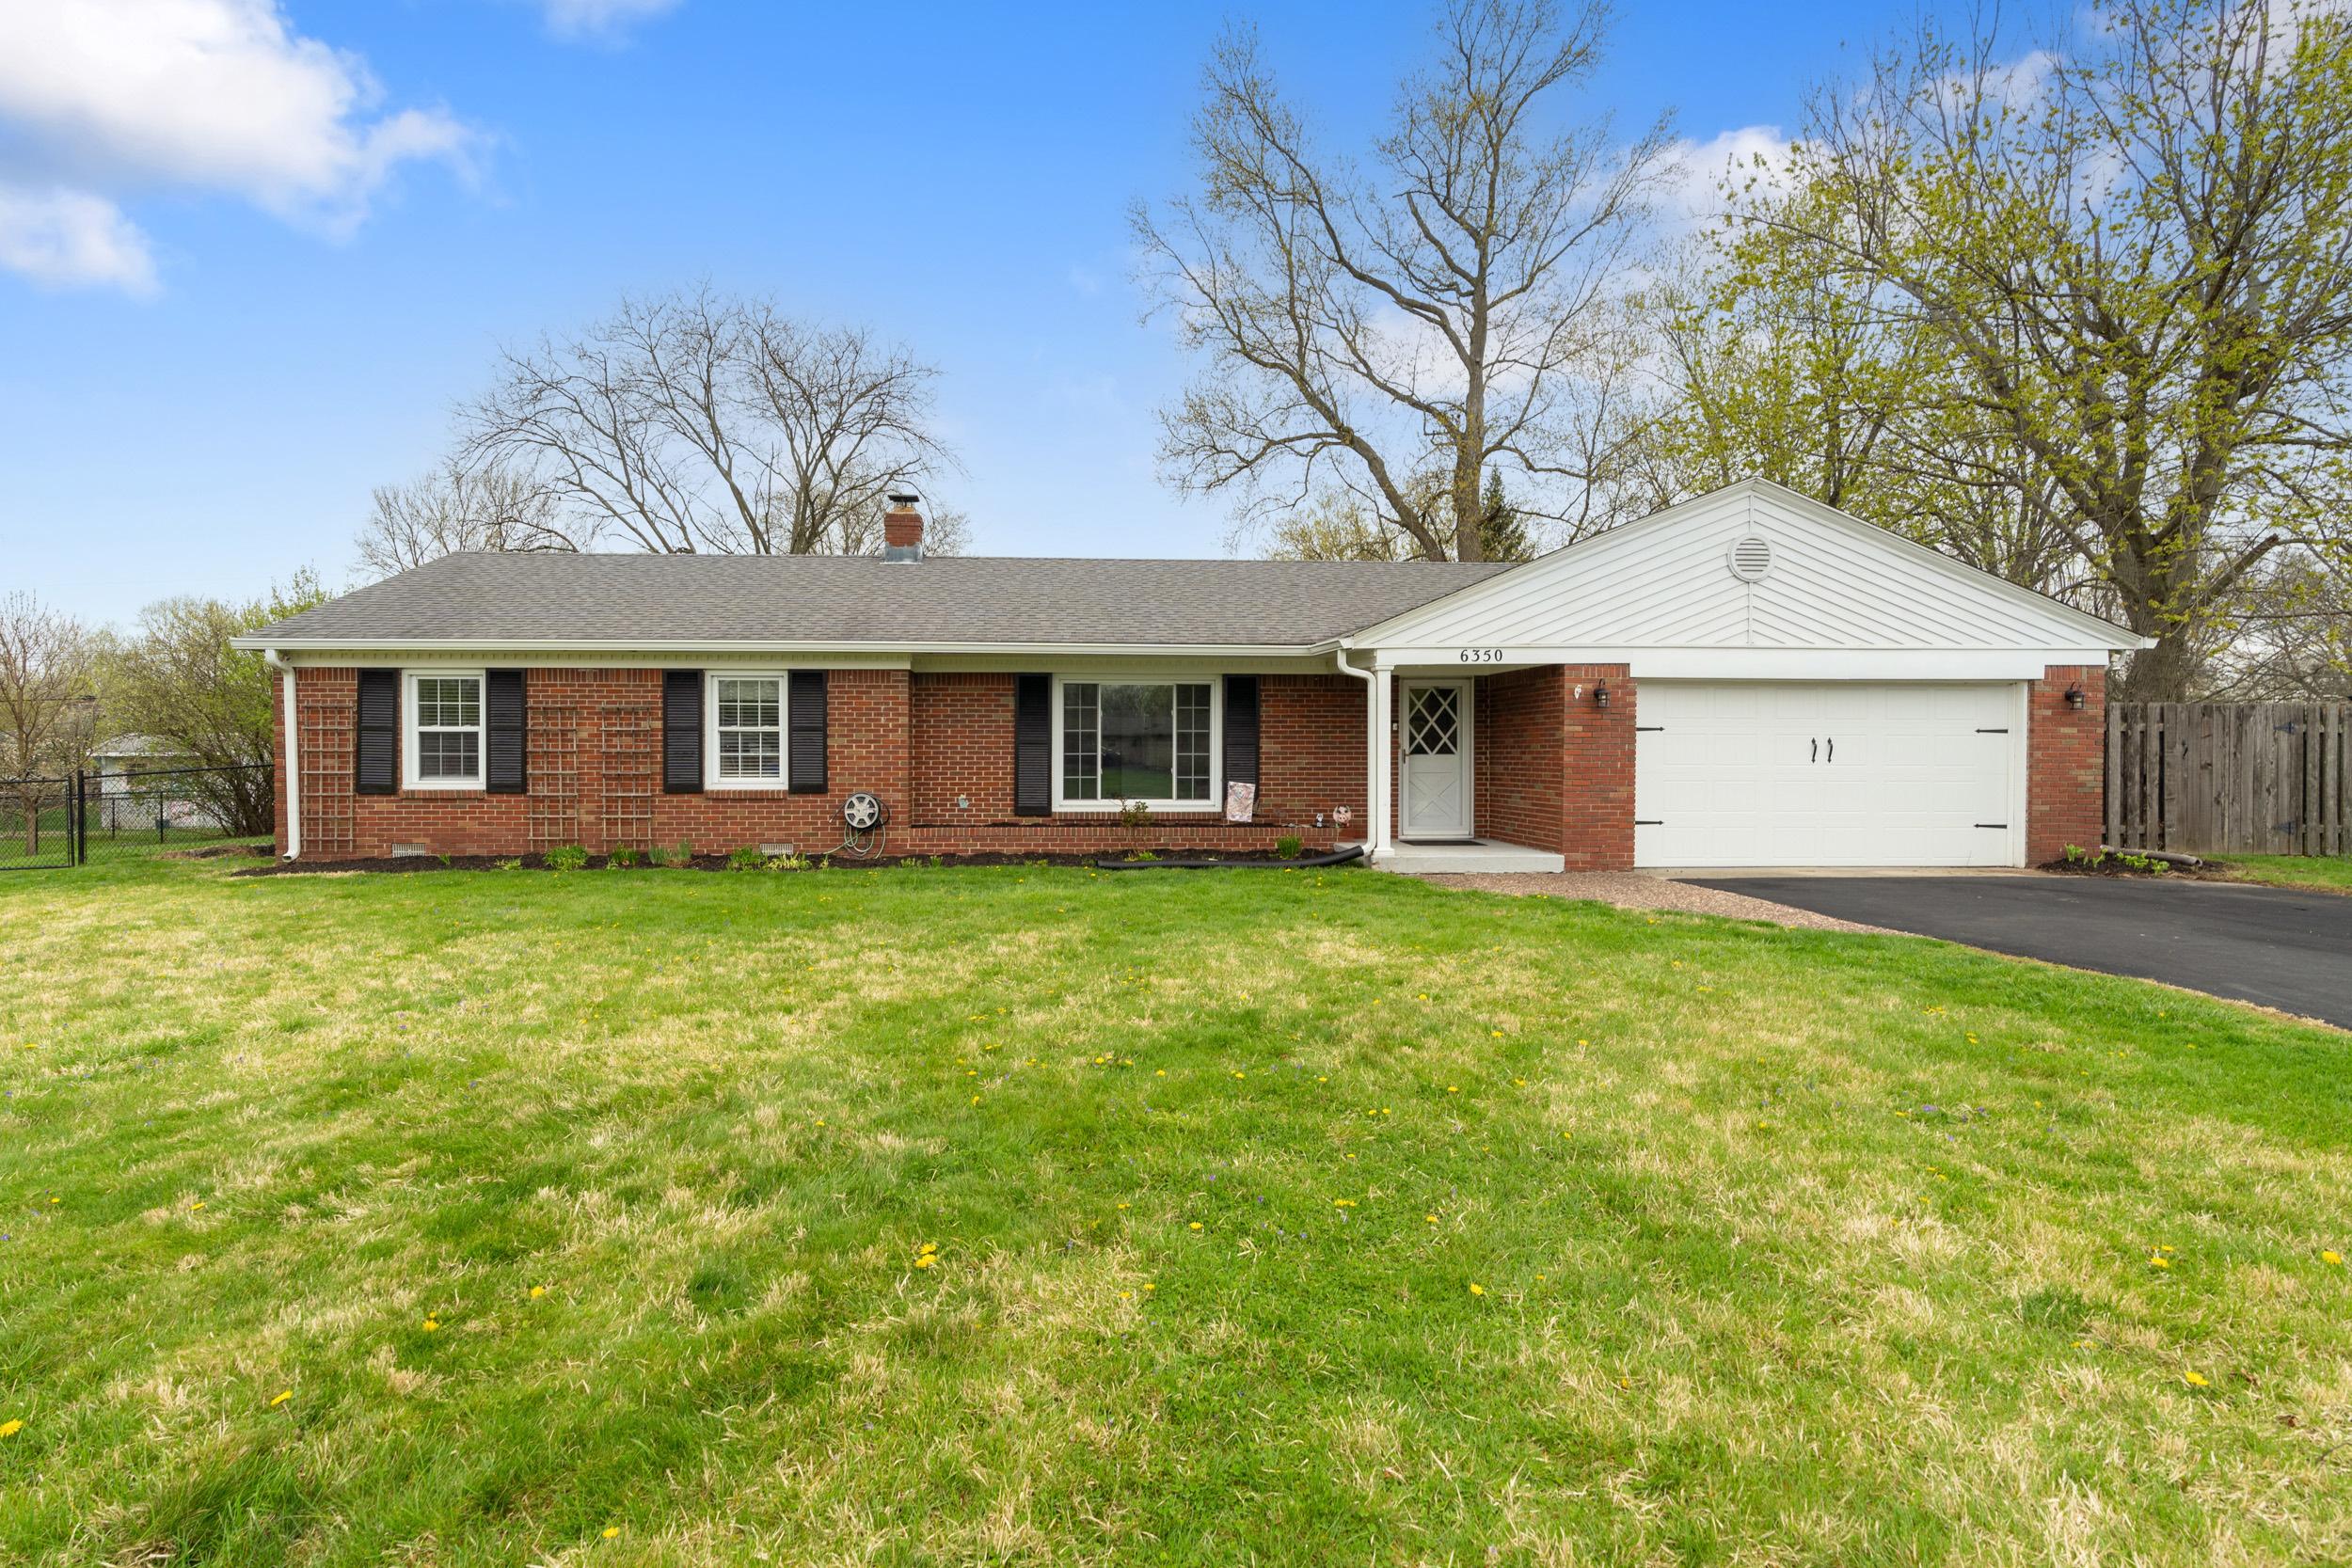 Photo one of 6350 Brokenhurst Rd Indianapolis IN 46220 | MLS 21970692